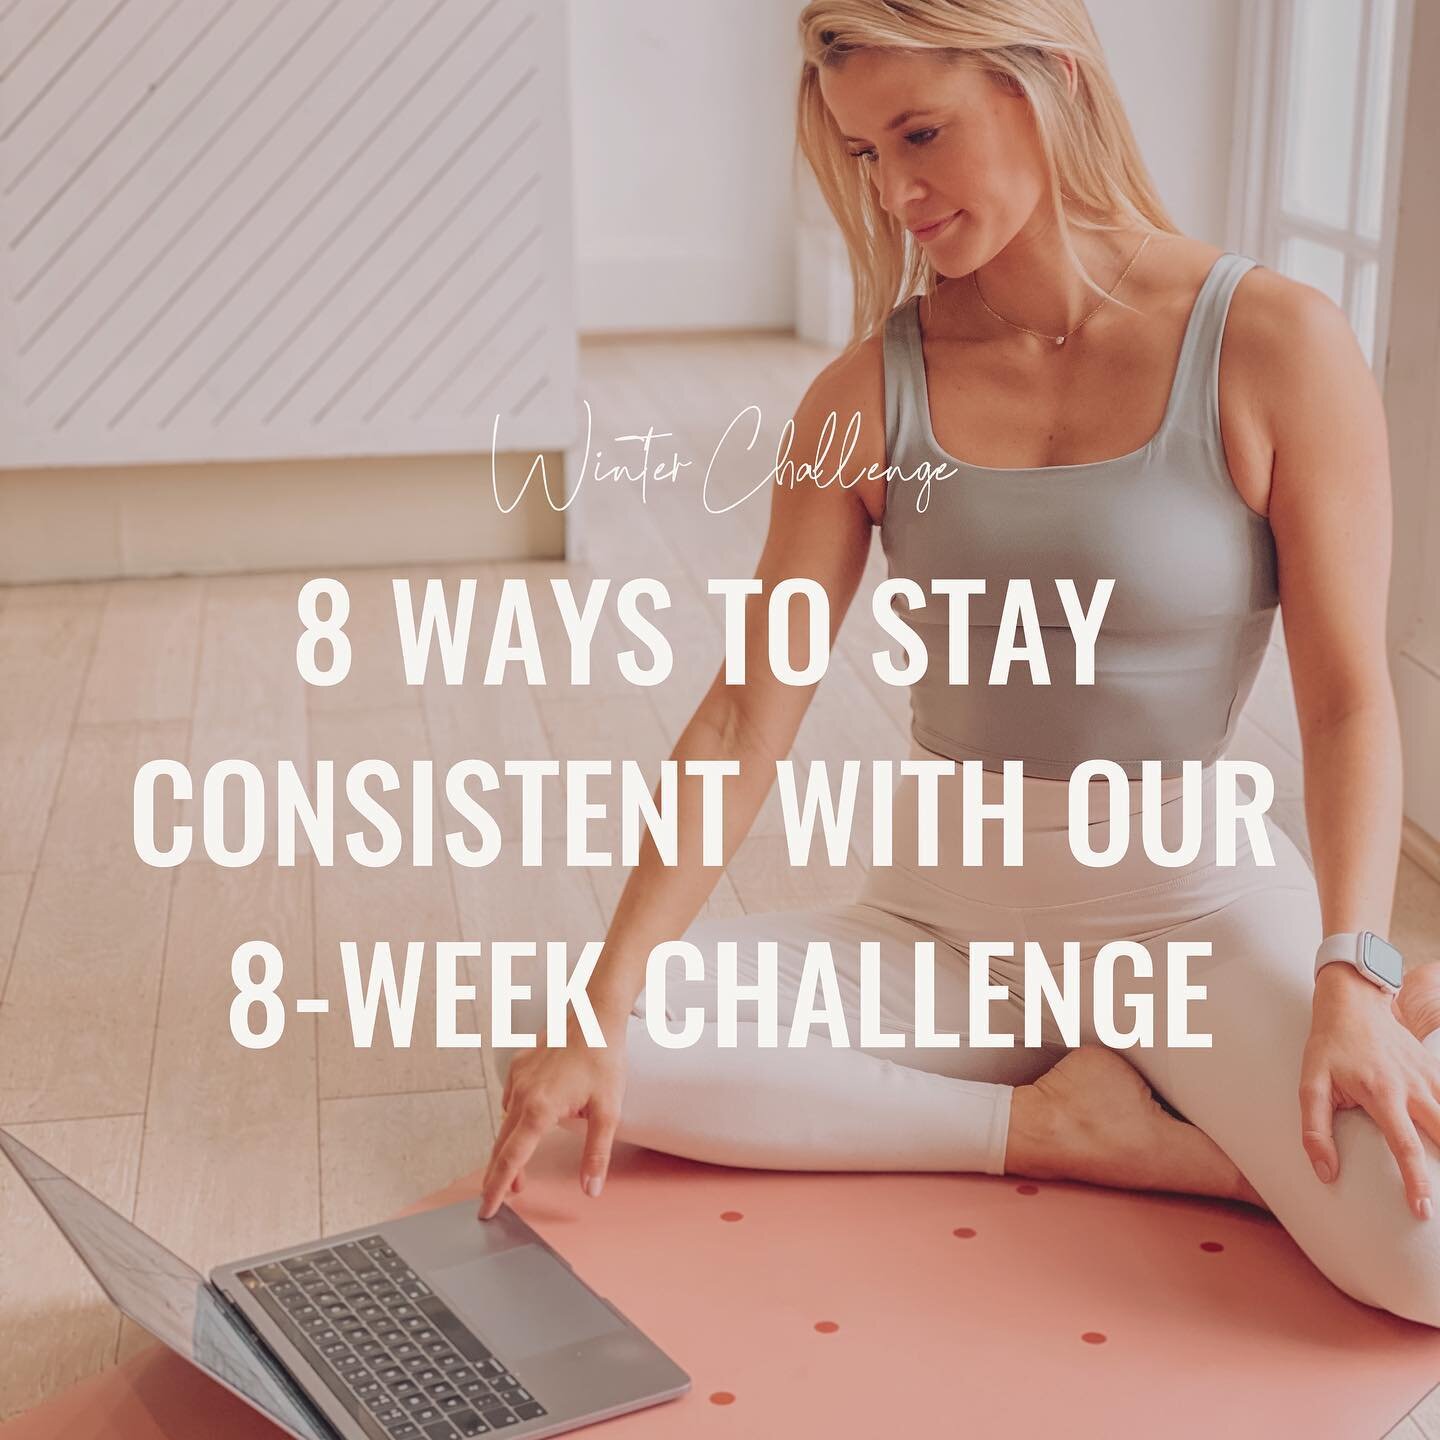 The Barre Coach Online Studio isn&rsquo;t just about giving you great classes. It&rsquo;s also about giving you all the tools I can to help you stay consistent with your workouts. 
&nbsp; &nbsp; &nbsp; &nbsp; &nbsp; &nbsp;
We&rsquo;re here for a good